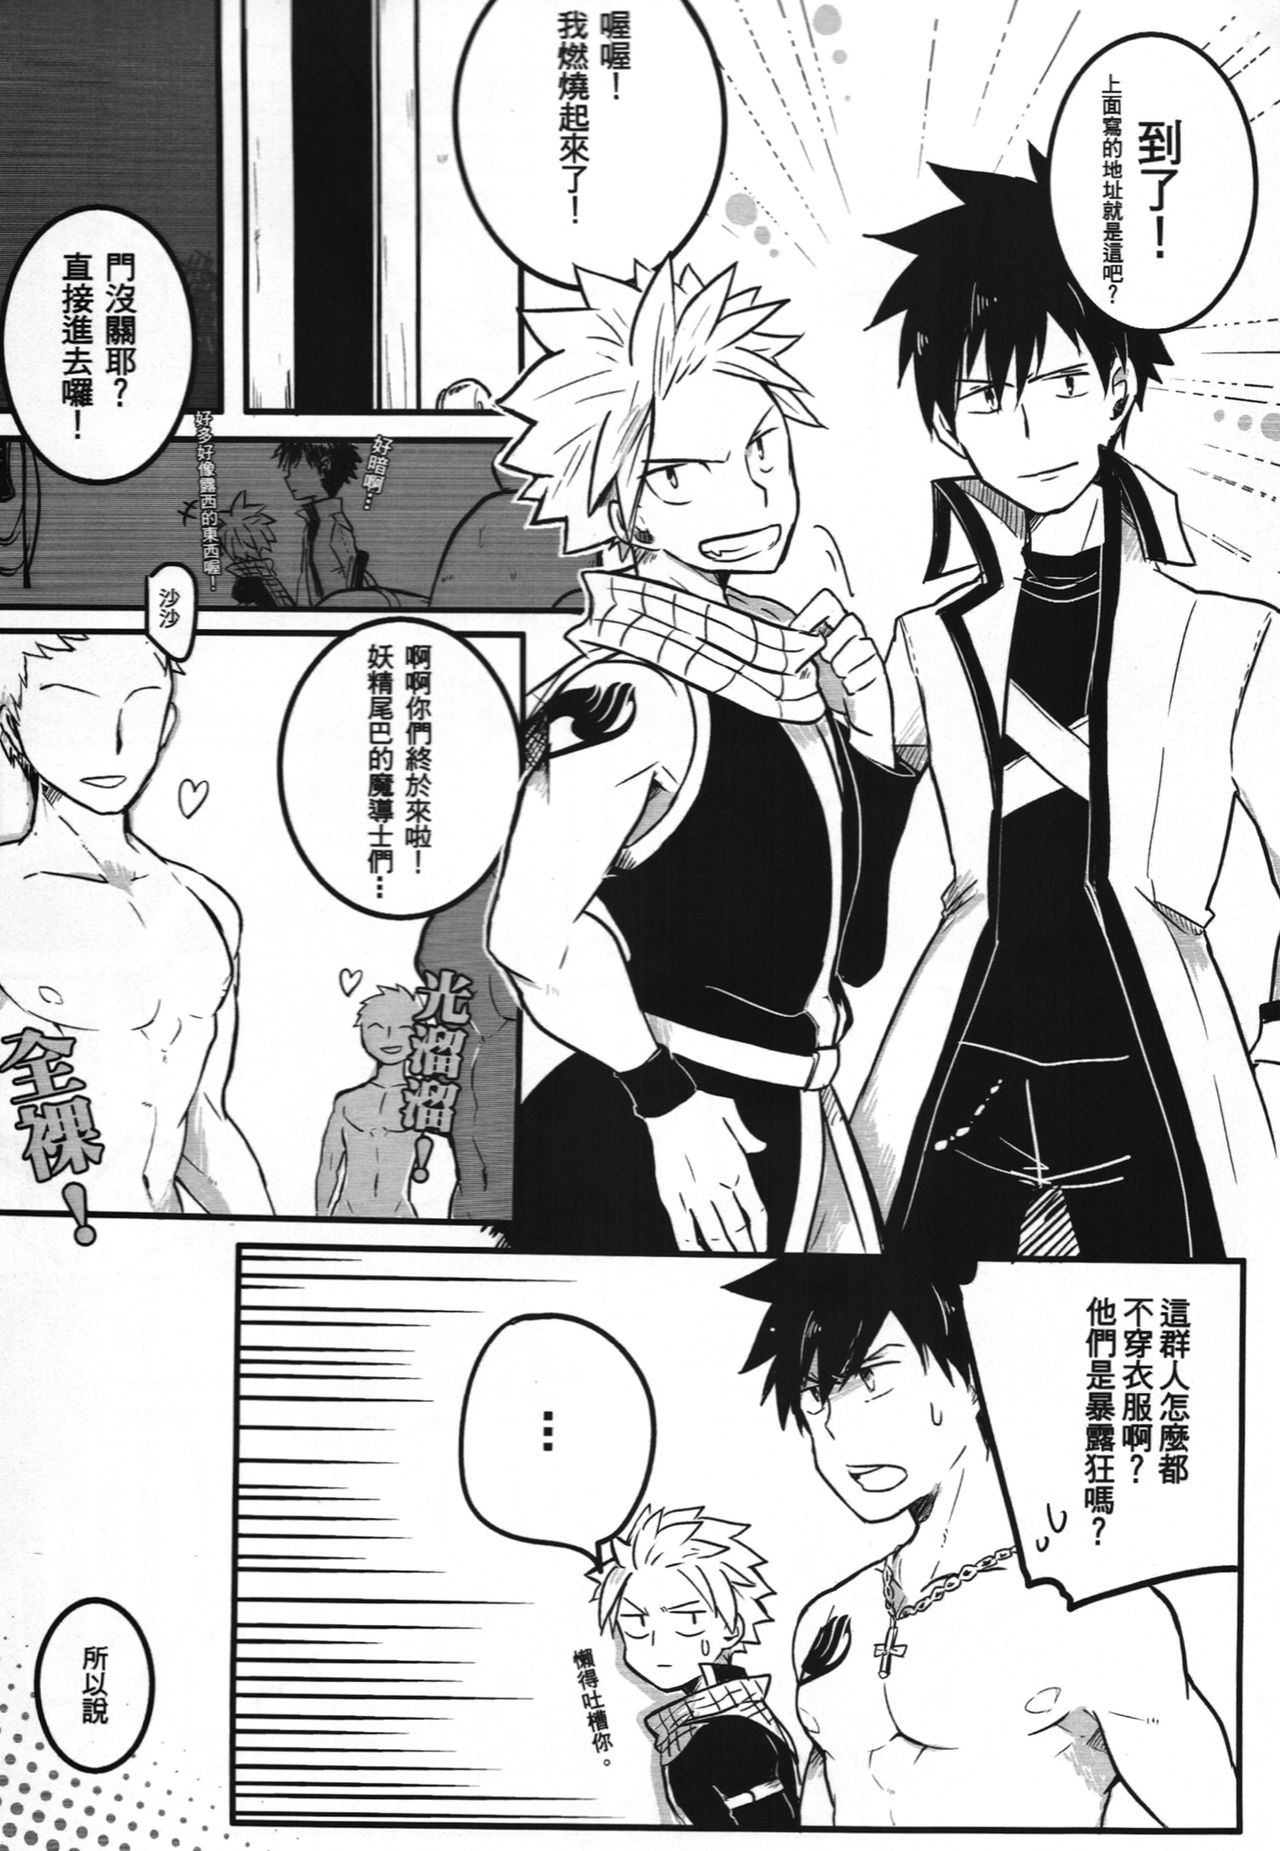 (CWT37) [APer (SEXY)] SS Kyuu Ninmu! (Fairy Tail) [Chinese] (CWT37) [APer (SEXY)] SS級任務! (フェアリーテイル) [中国語]